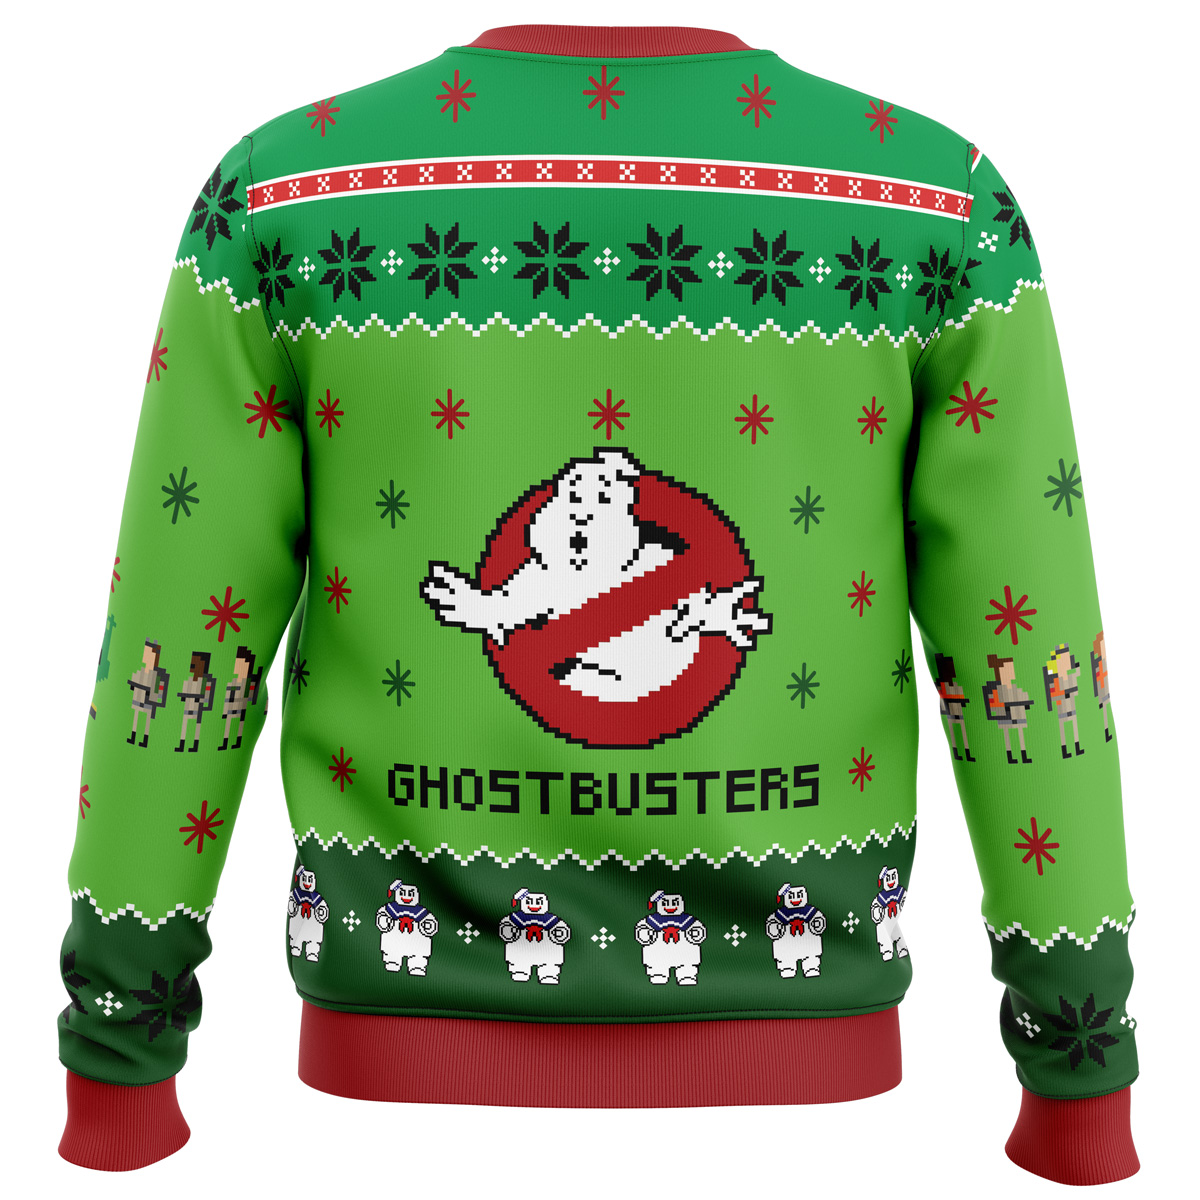 Ghostbusters Ugly Christmas Sweater - Chow Down Movie Store